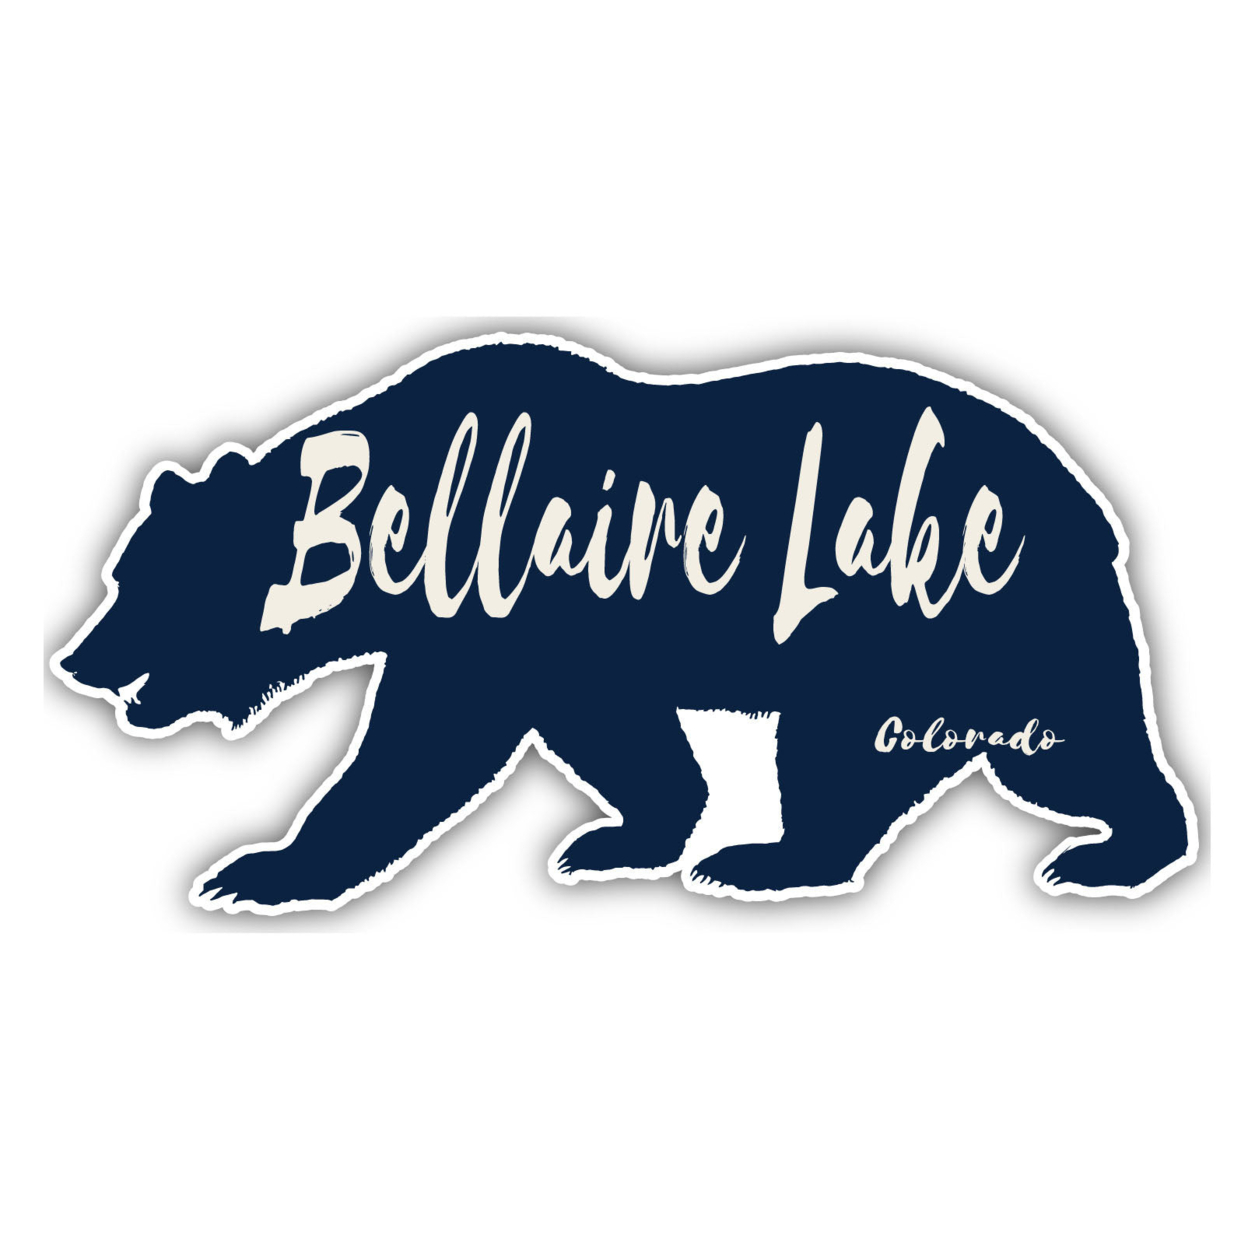 Bellaire Lake Colorado Souvenir Decorative Stickers (Choose Theme And Size) - 4-Pack, 8-Inch, Bear